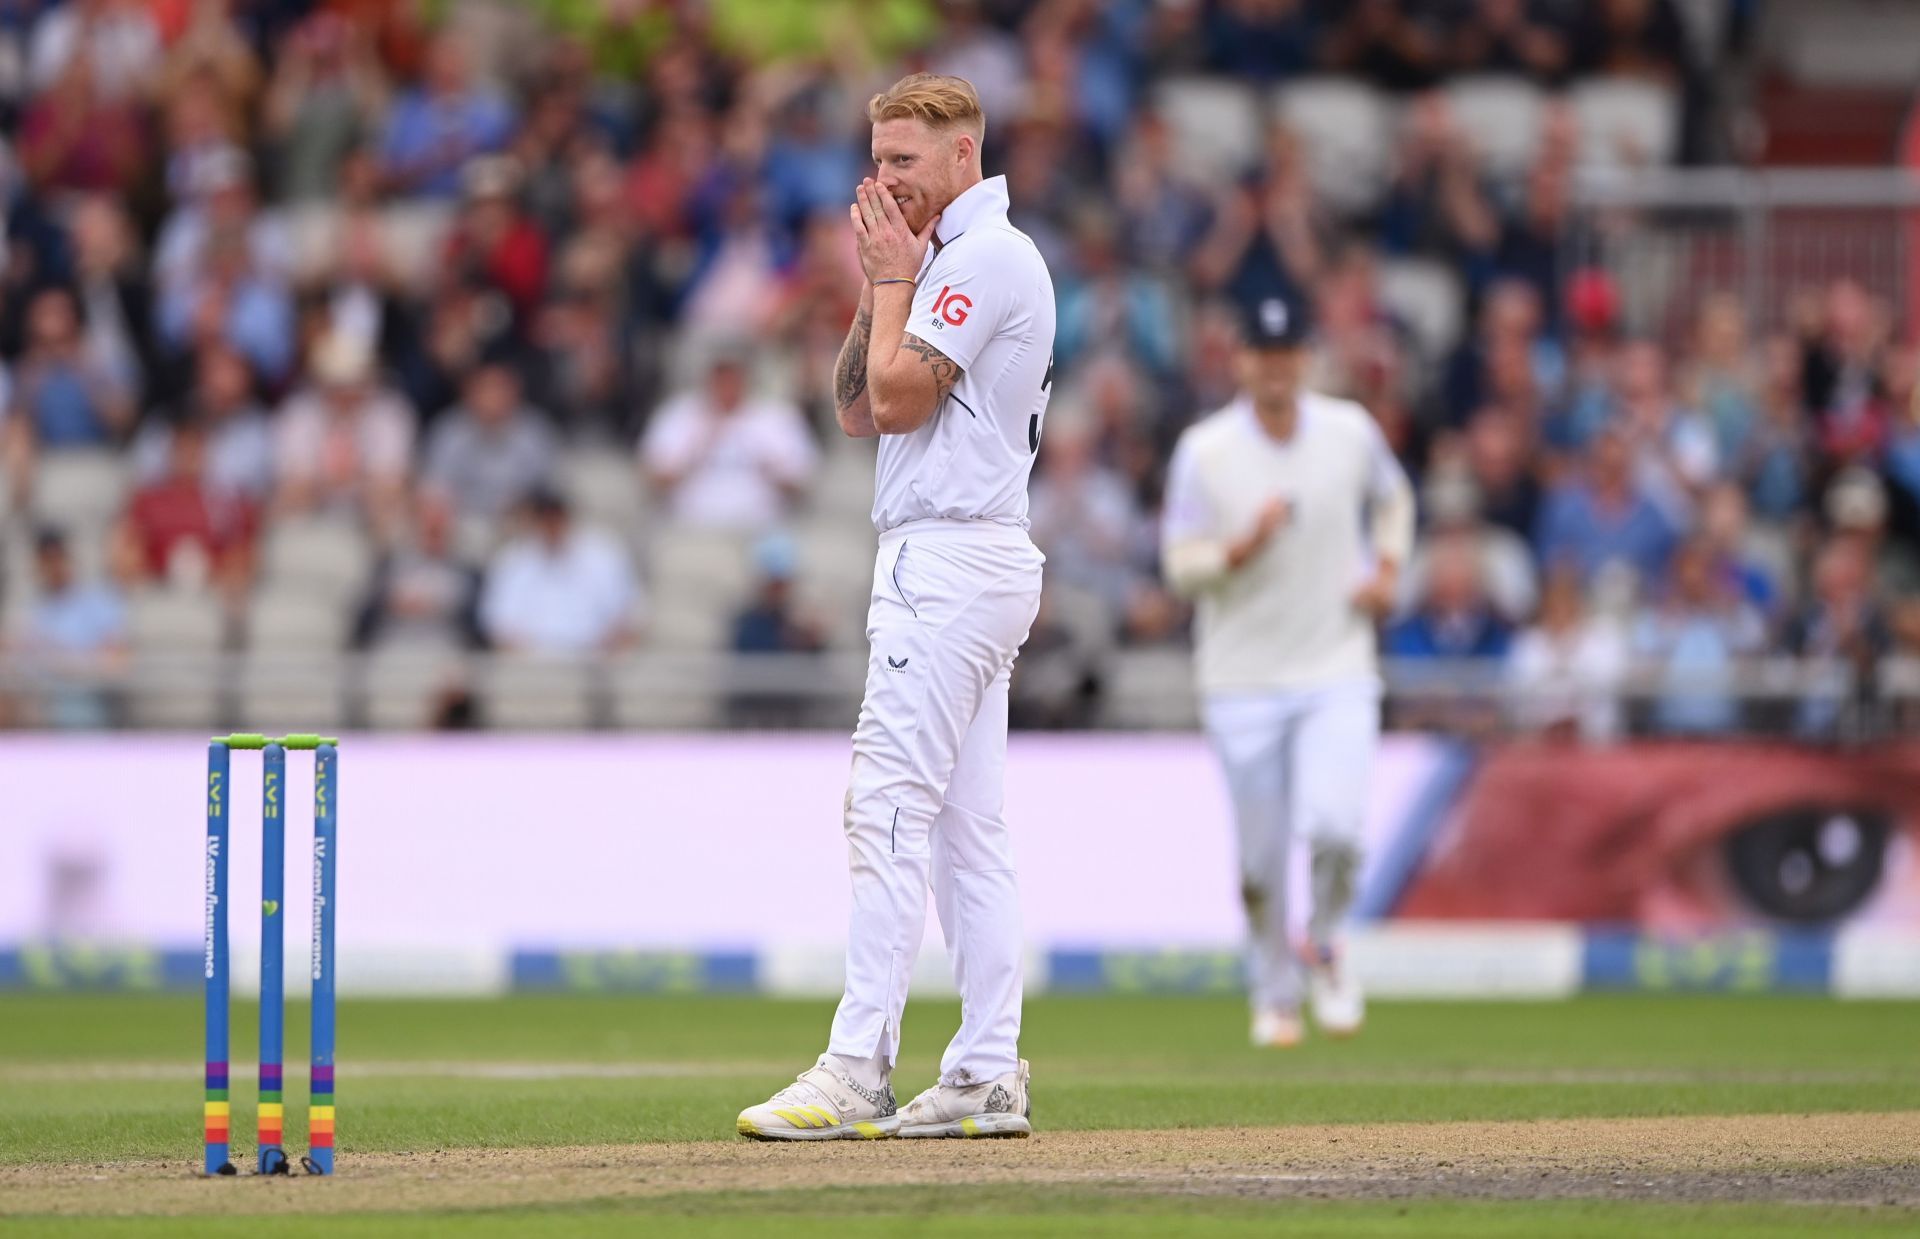 Stokes has an impressive bowling record as Test captain. Pic: Getty Images